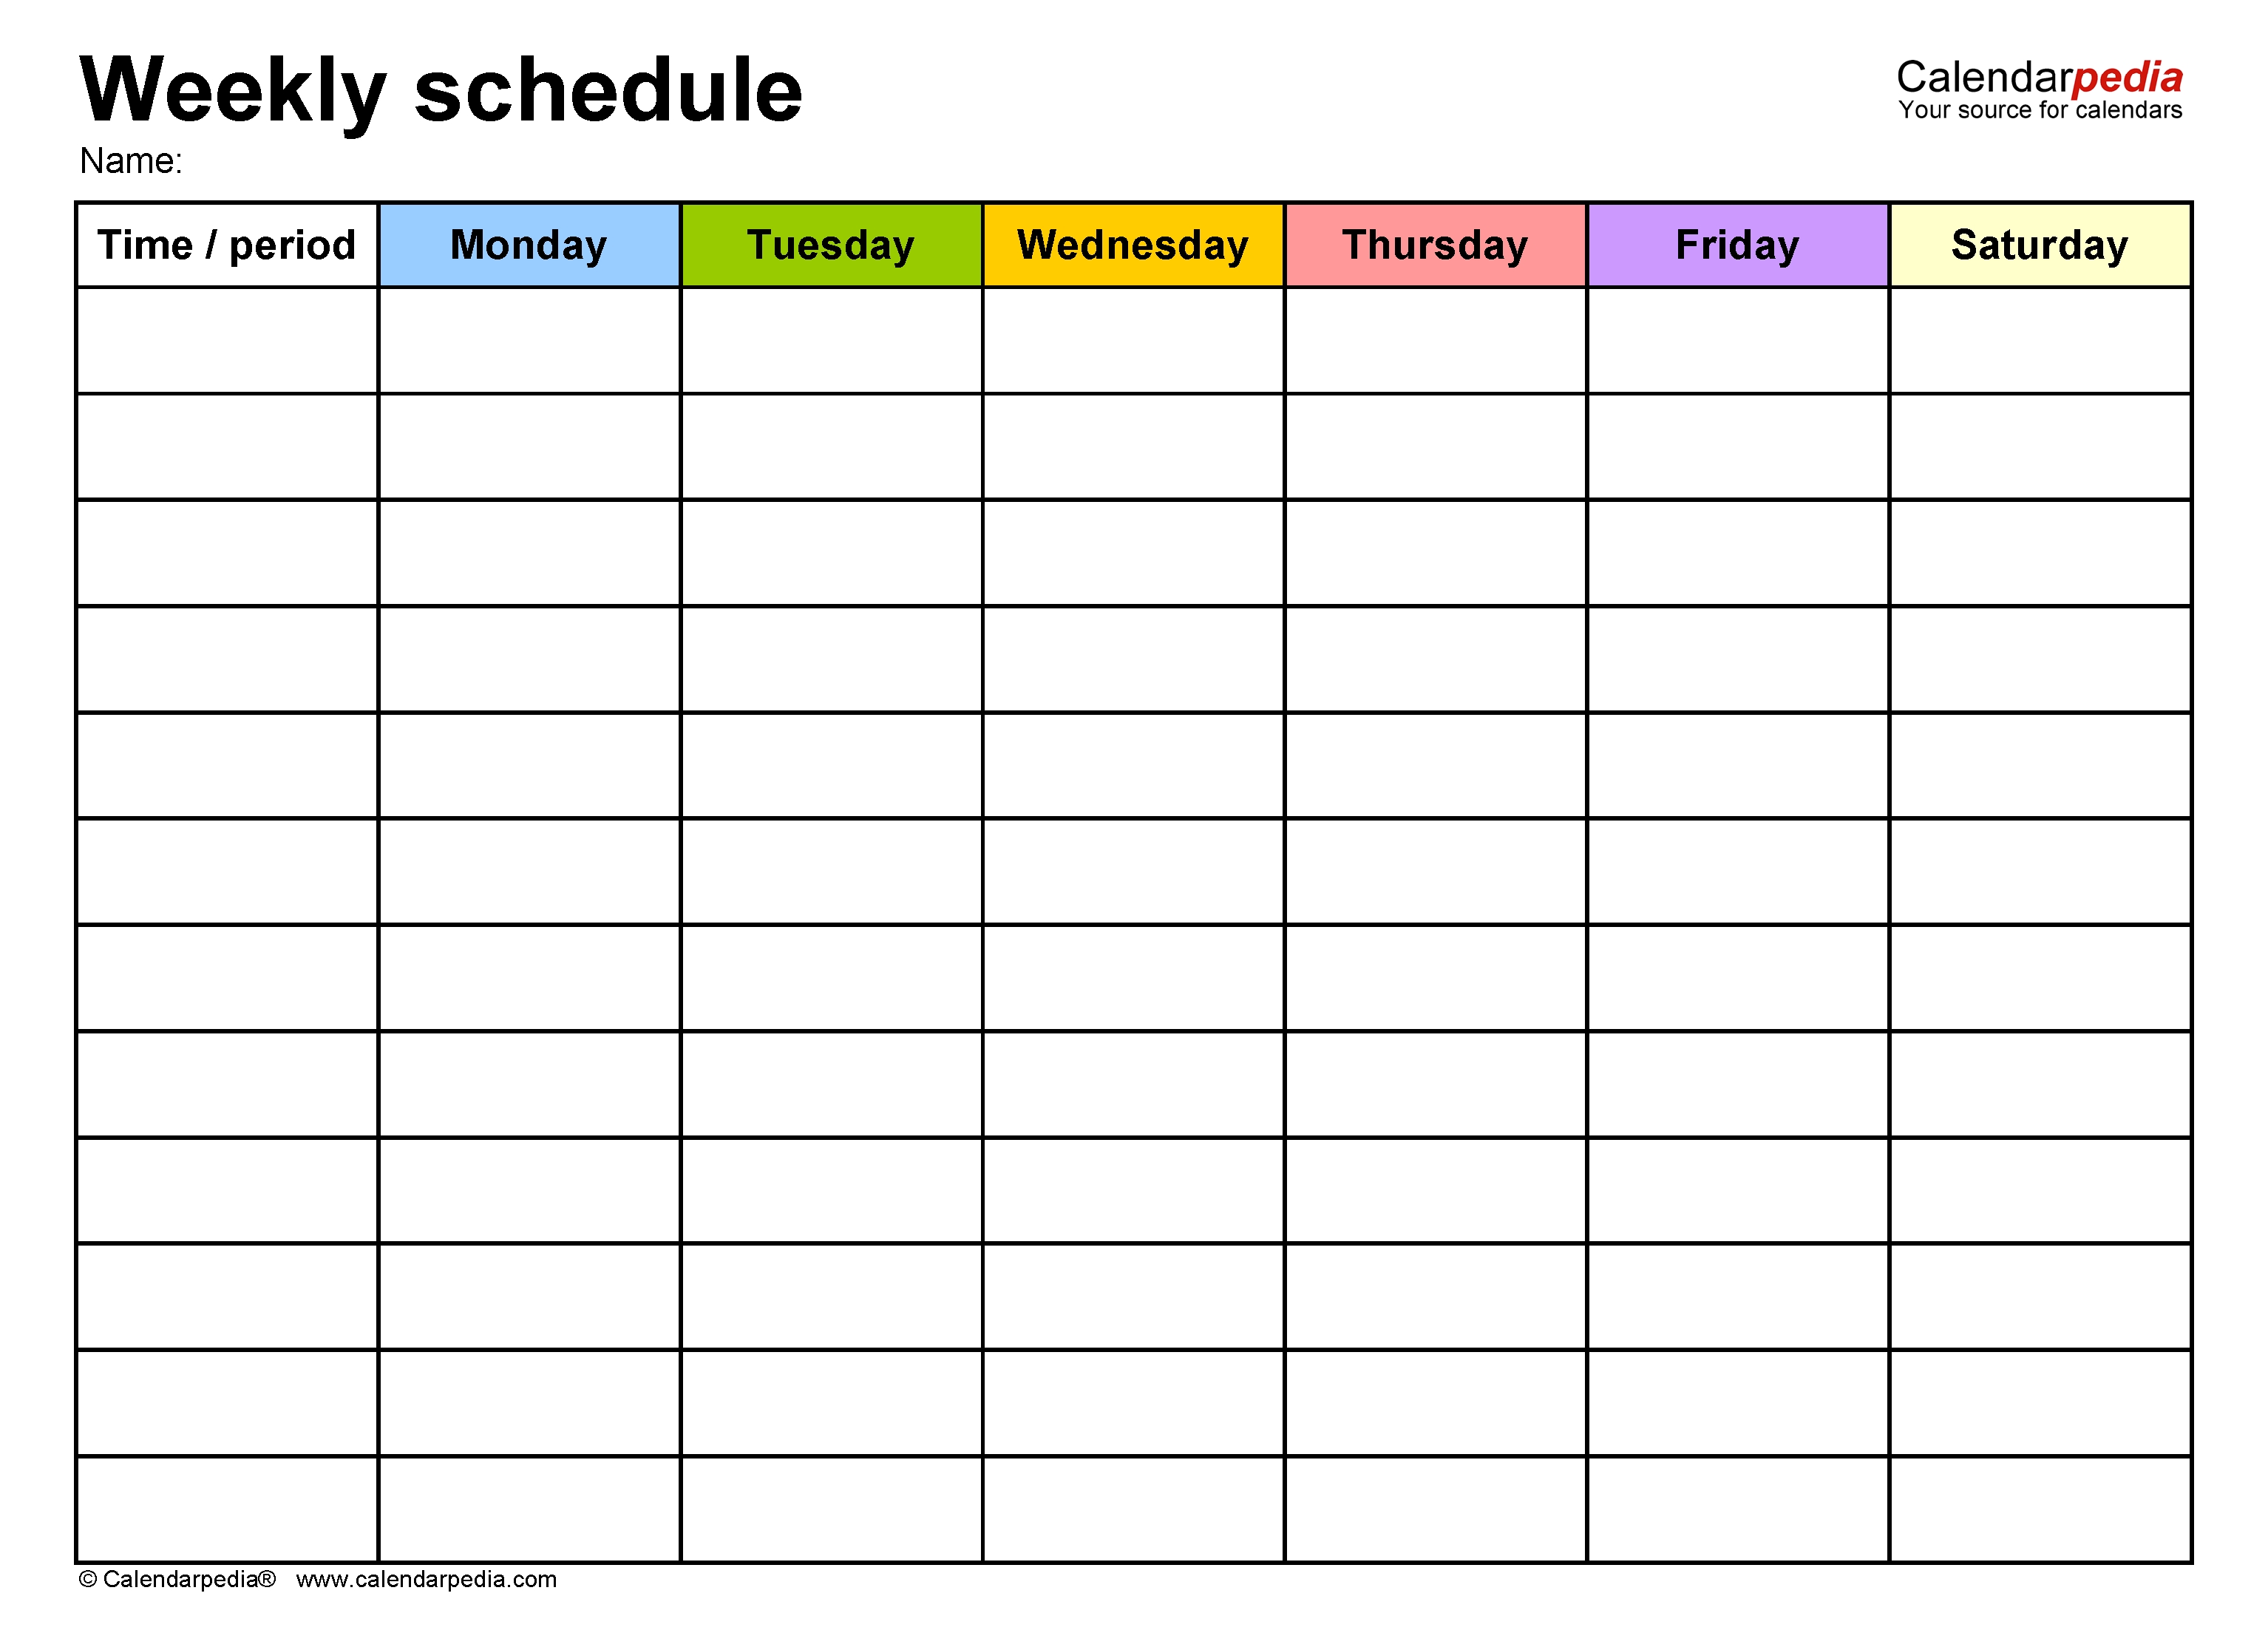 Free Weekly Schedule Templates For Word - 18 Templates Calendar Template Sunday To Saturday